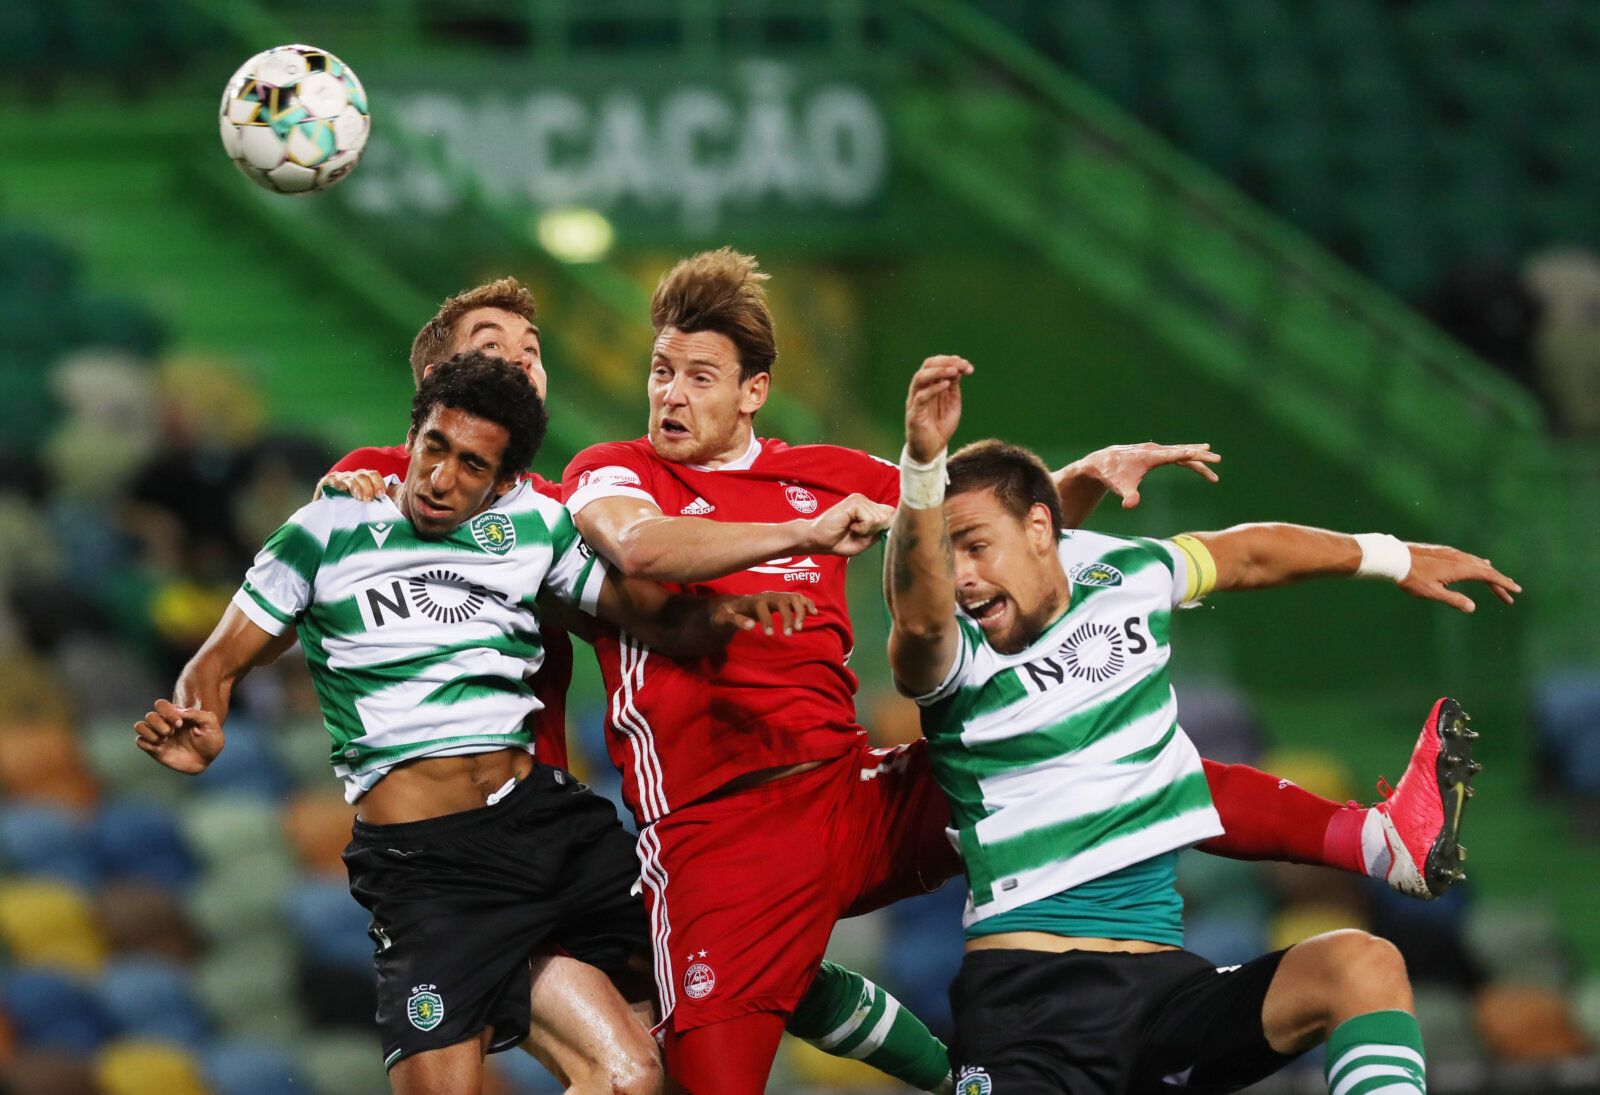 Soccer Football - Europa League - Third qualifying round - Sporting CP v Aberdeen - Estadio Jose Alvalade, Lisbon, Portugal - September 24, 2020  Sporting CP's Tiago Tomas and Sebastian Coates in action with Aberdeen's Marley Watkins REUTERS/Pedro Nunes